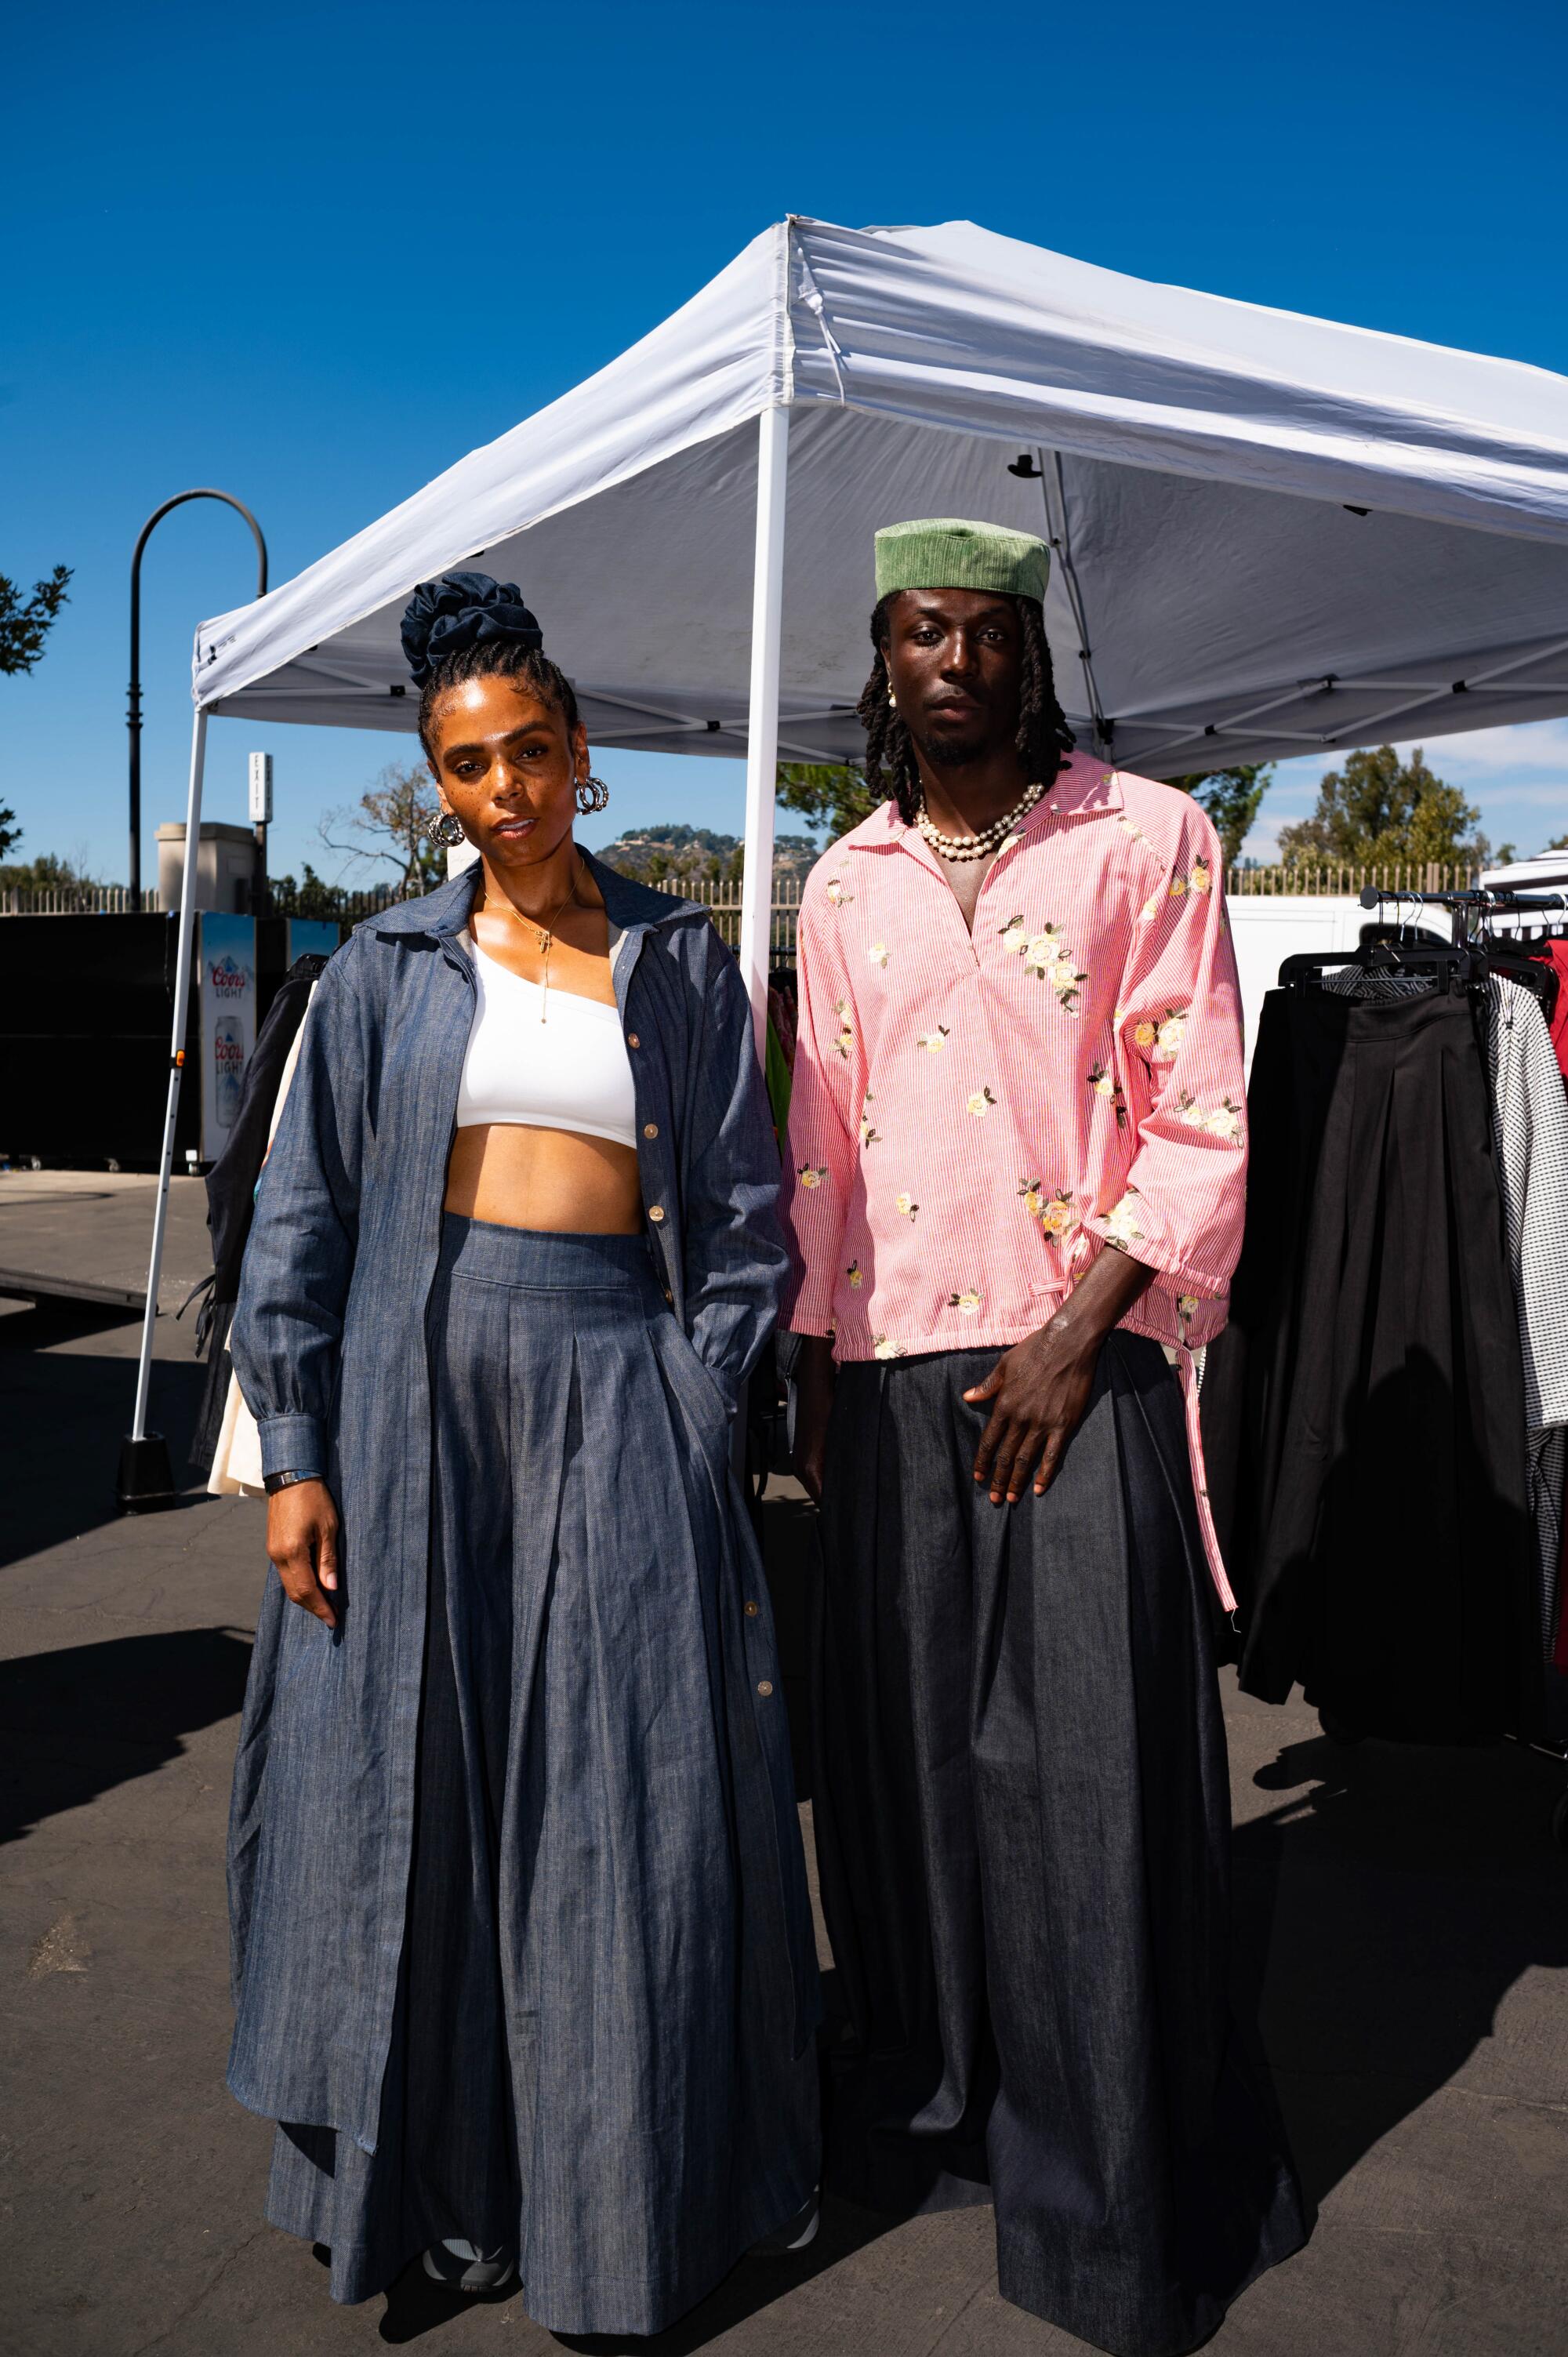 Style at the Rose Bowl Flea